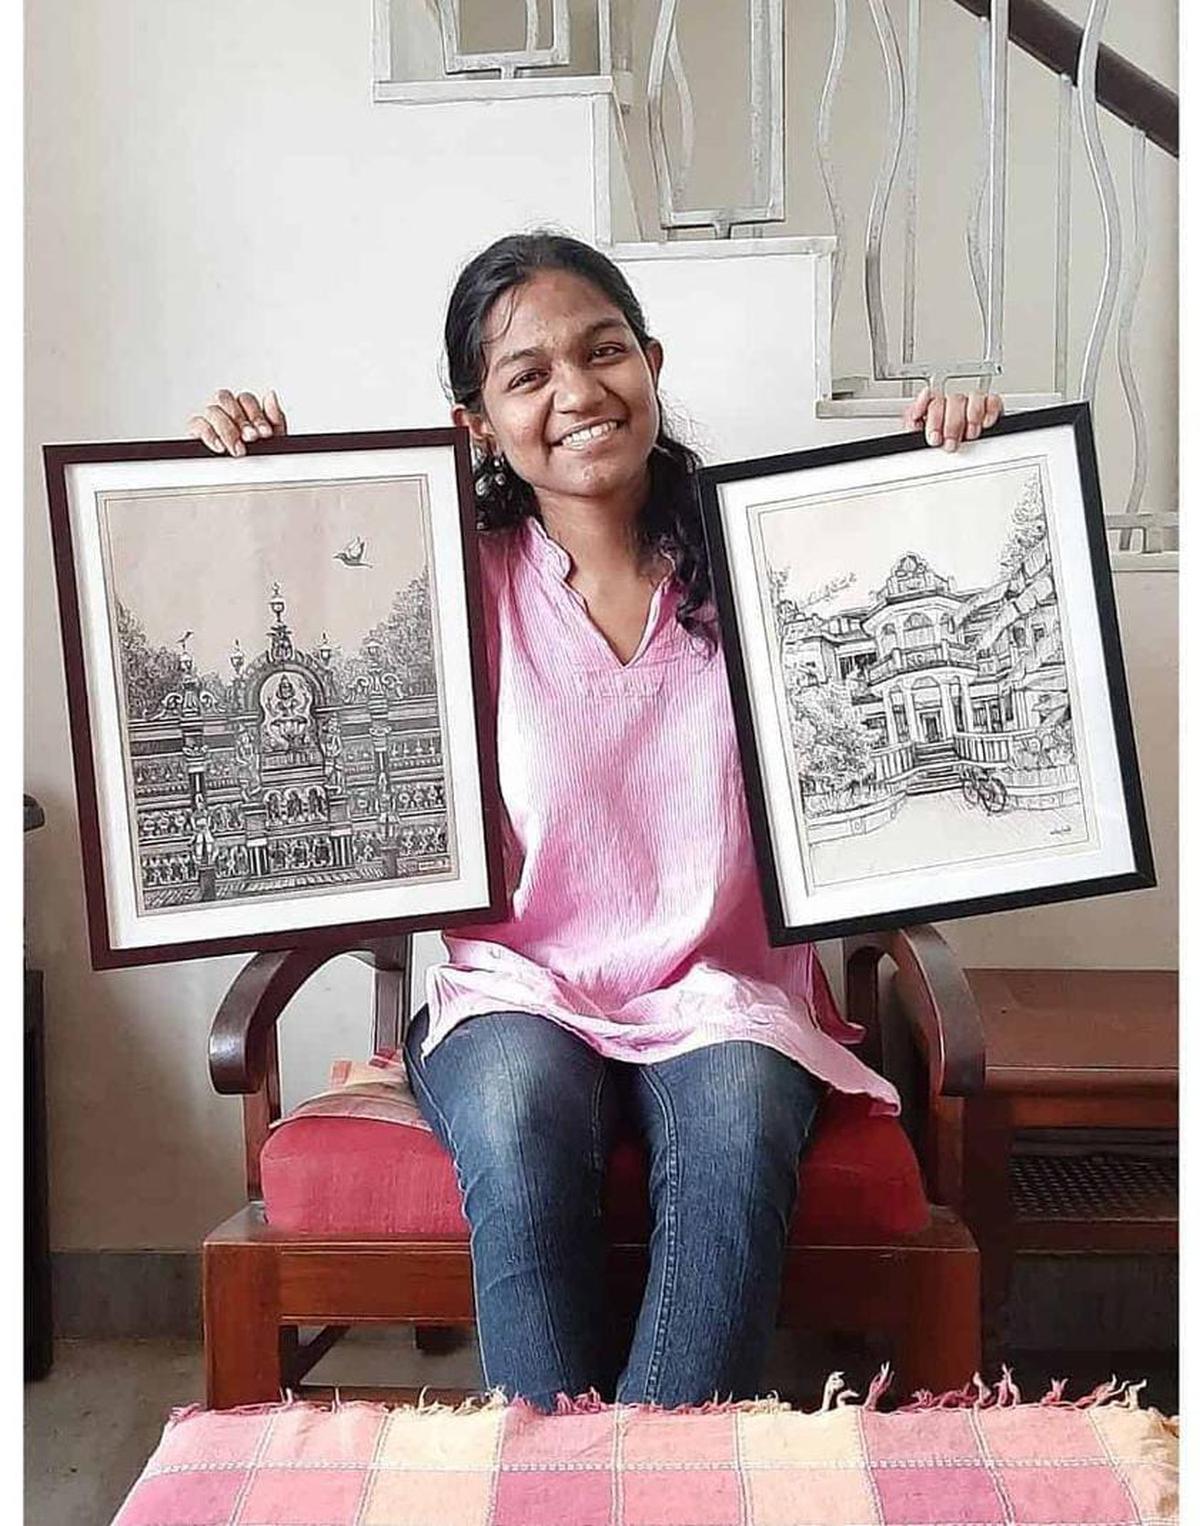 Lakshmi Olagammai’s hand-drawn illustrations will be digitised and converted into postcards for guests of the Chettinad Festival this year